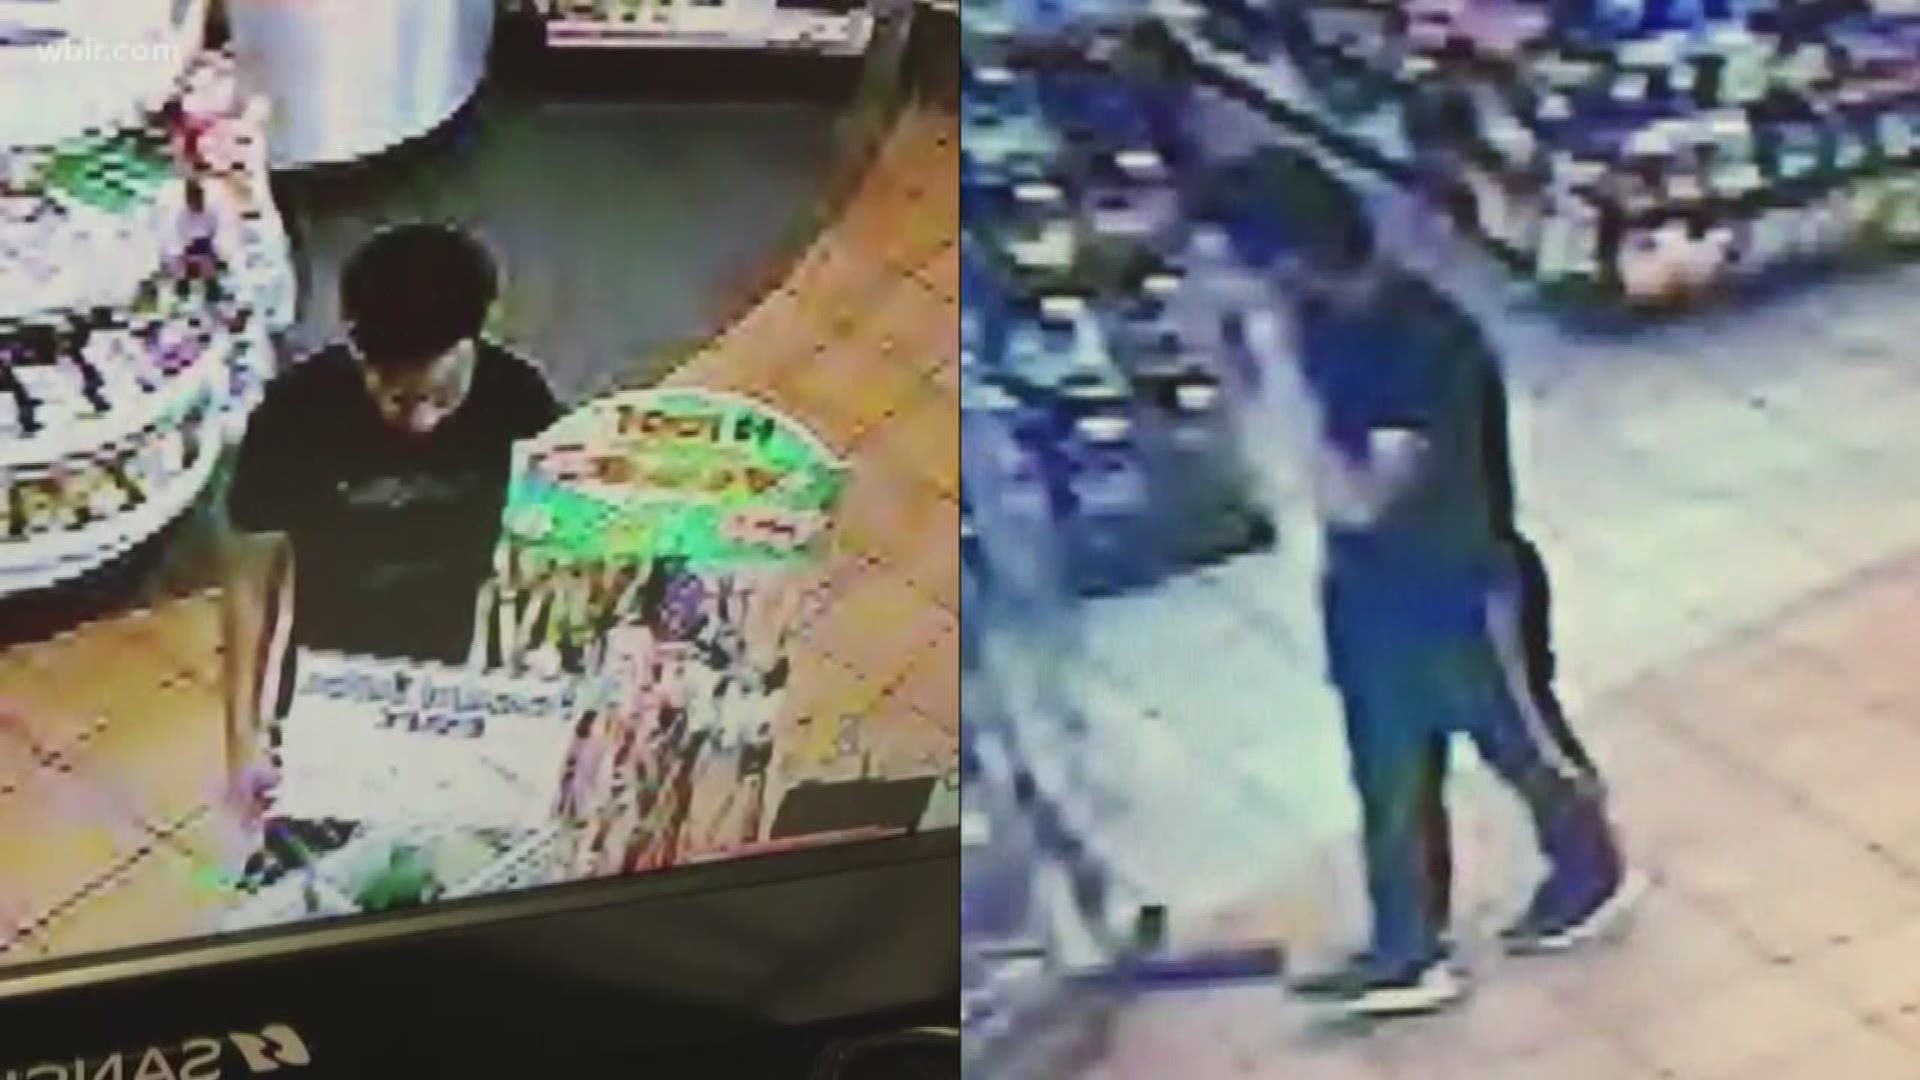 Blount County authorities are still searching for two men who robbed a store at gunpoint. The sheriff's office says the men you see in this surveillance video robbed La Lupita on East Broadway last night.